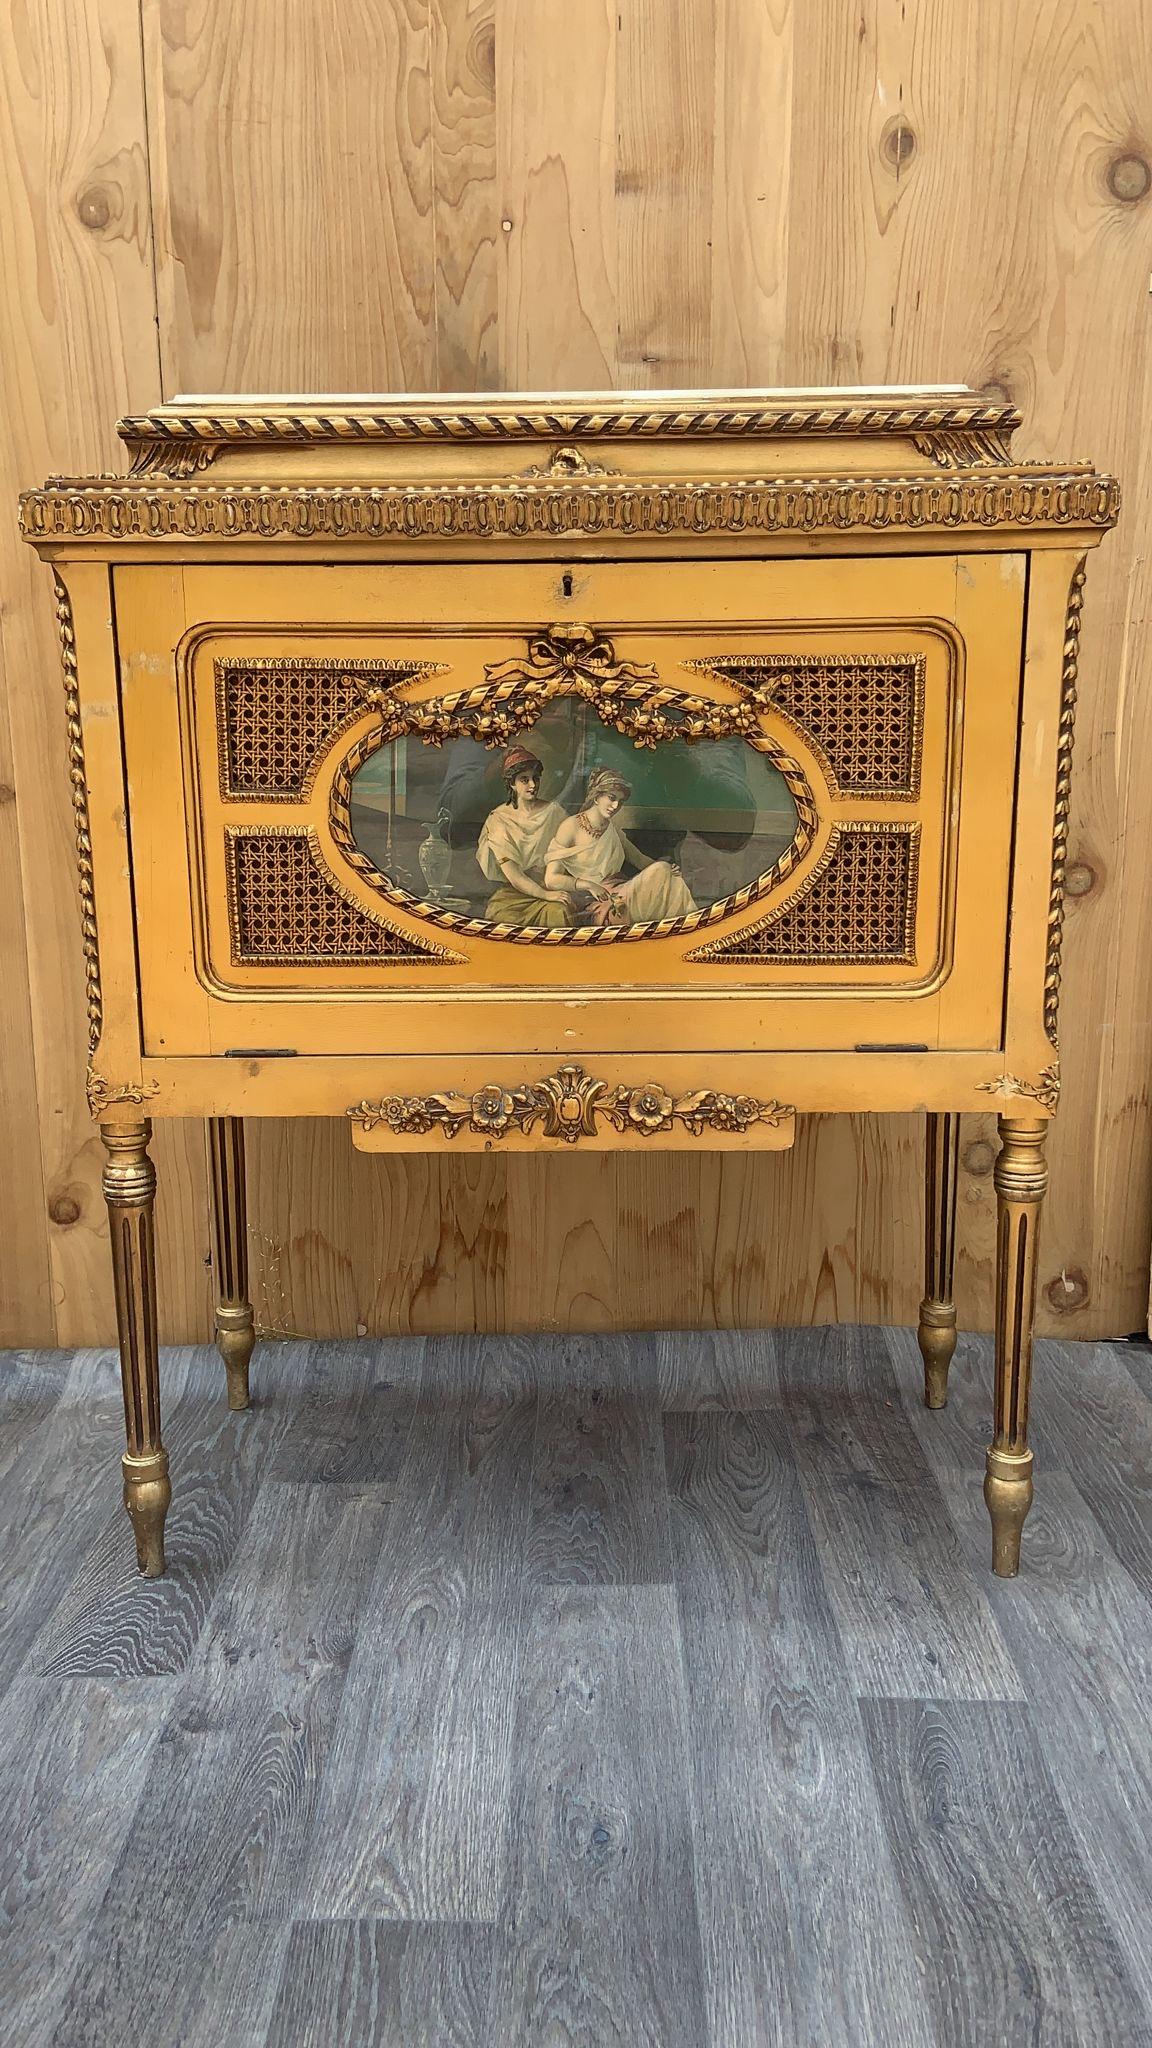 Antique Italian Rococo Styled Decorative Painted Gilt and Onyx Storage Cabinet/Dry Bar

Gorgeous Antique Italian Rococo Styled Decorative Painted Gilt Storage Cabinet/Dry Bar. This  piece was beautifully crafted with rectangular onyx top. It is